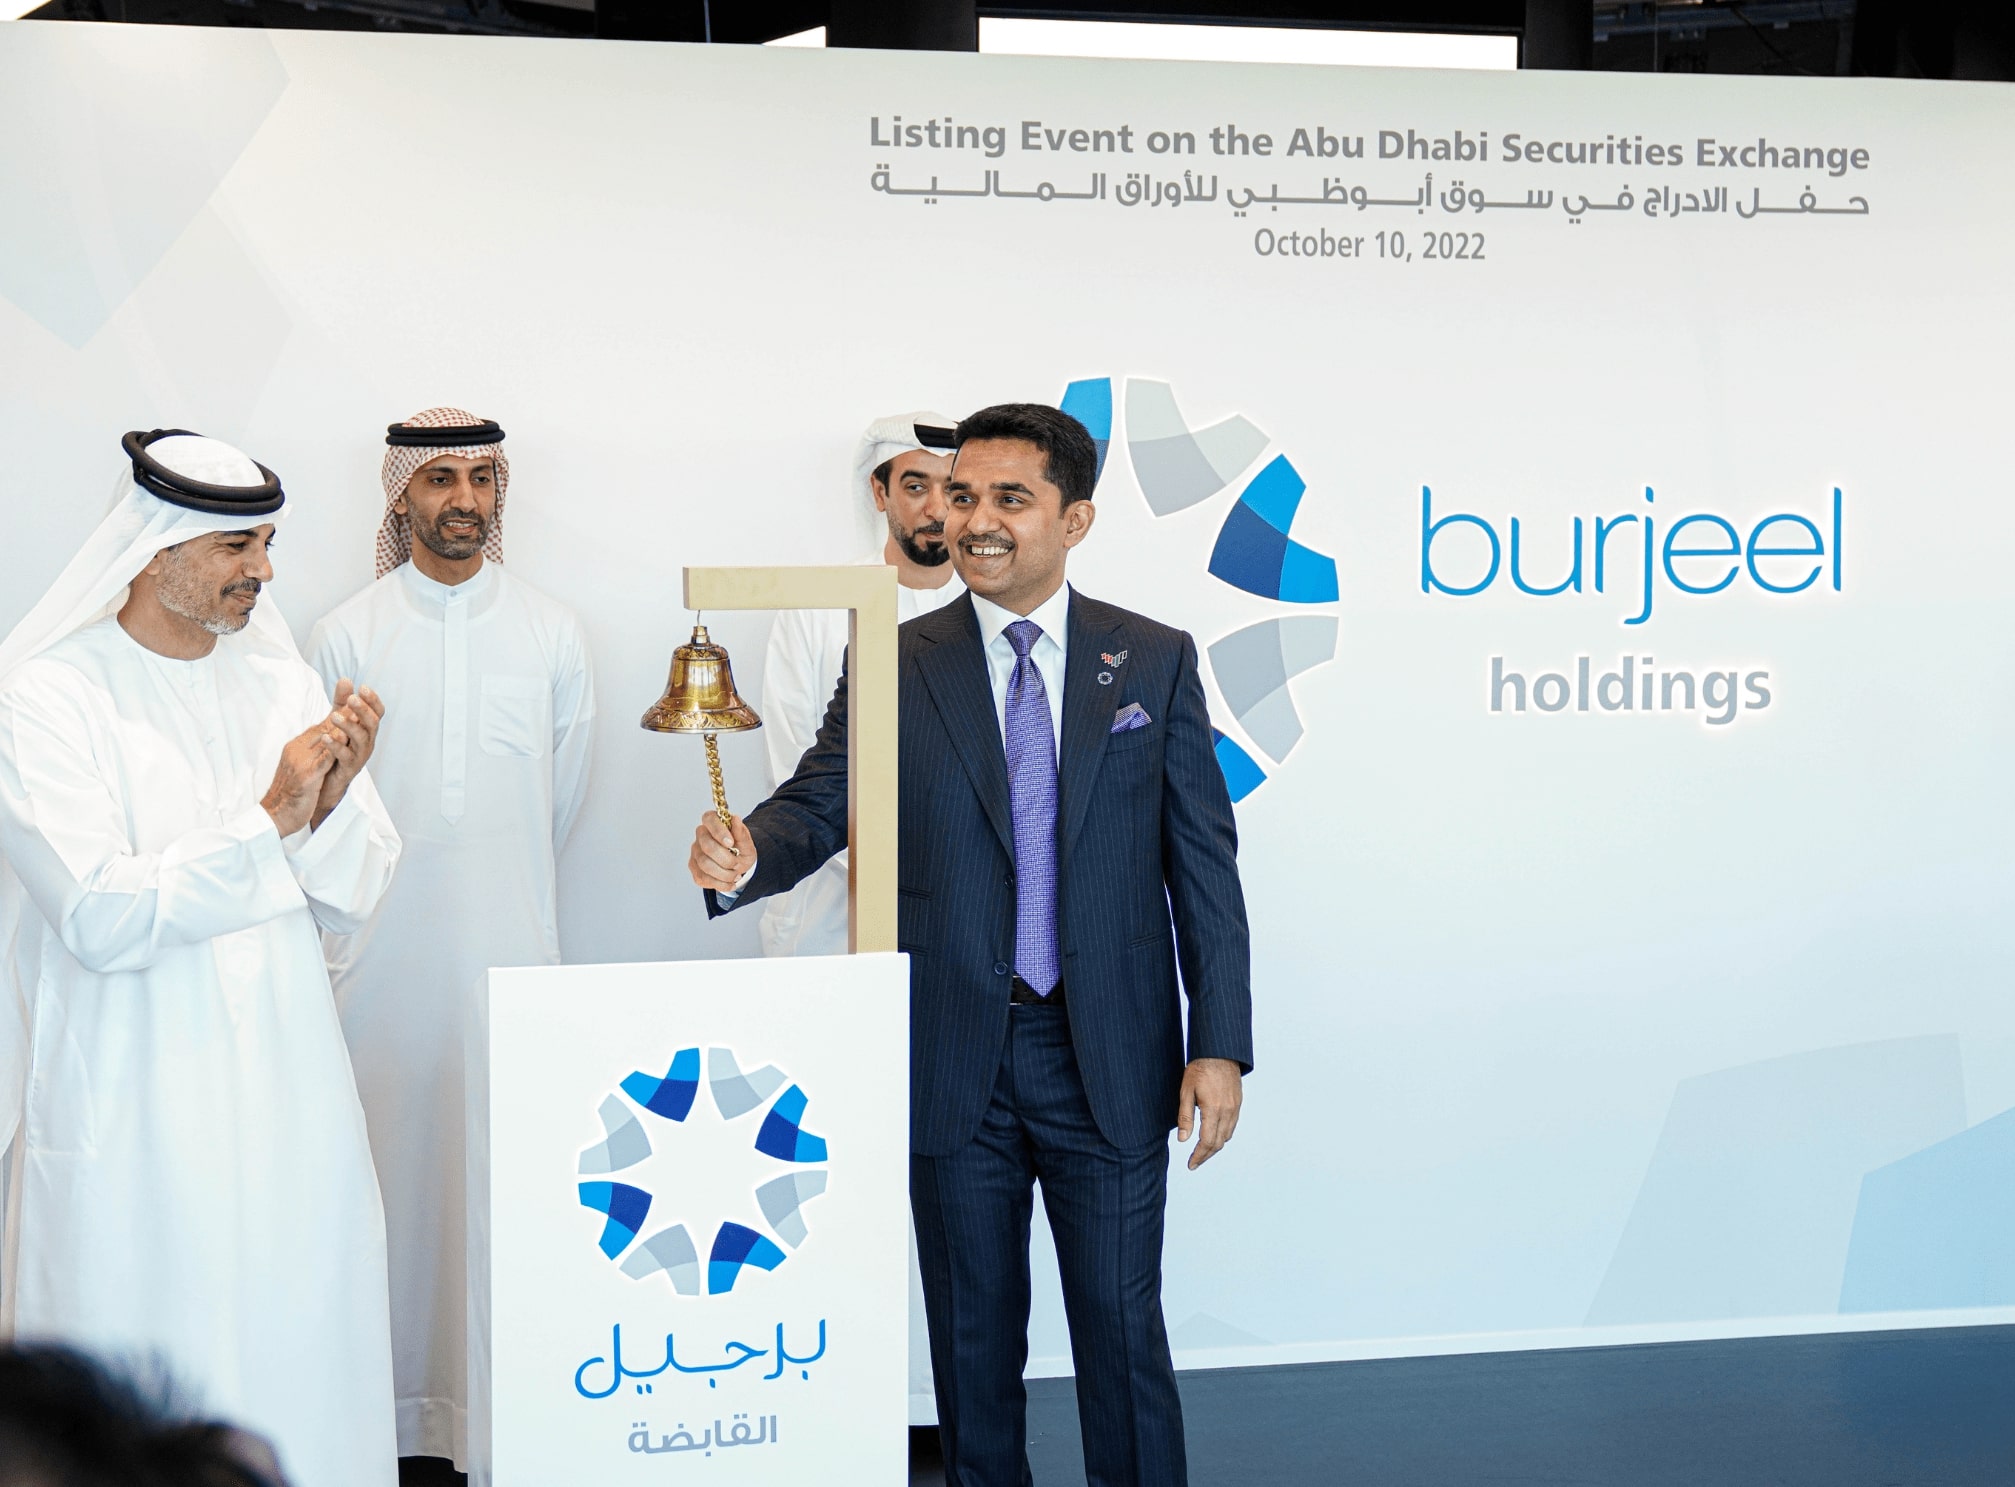 BURJEEL HOLDINGS SUCCESSFULLY LISTS ON ADX RAISING OVER AED 1.1 BILLION